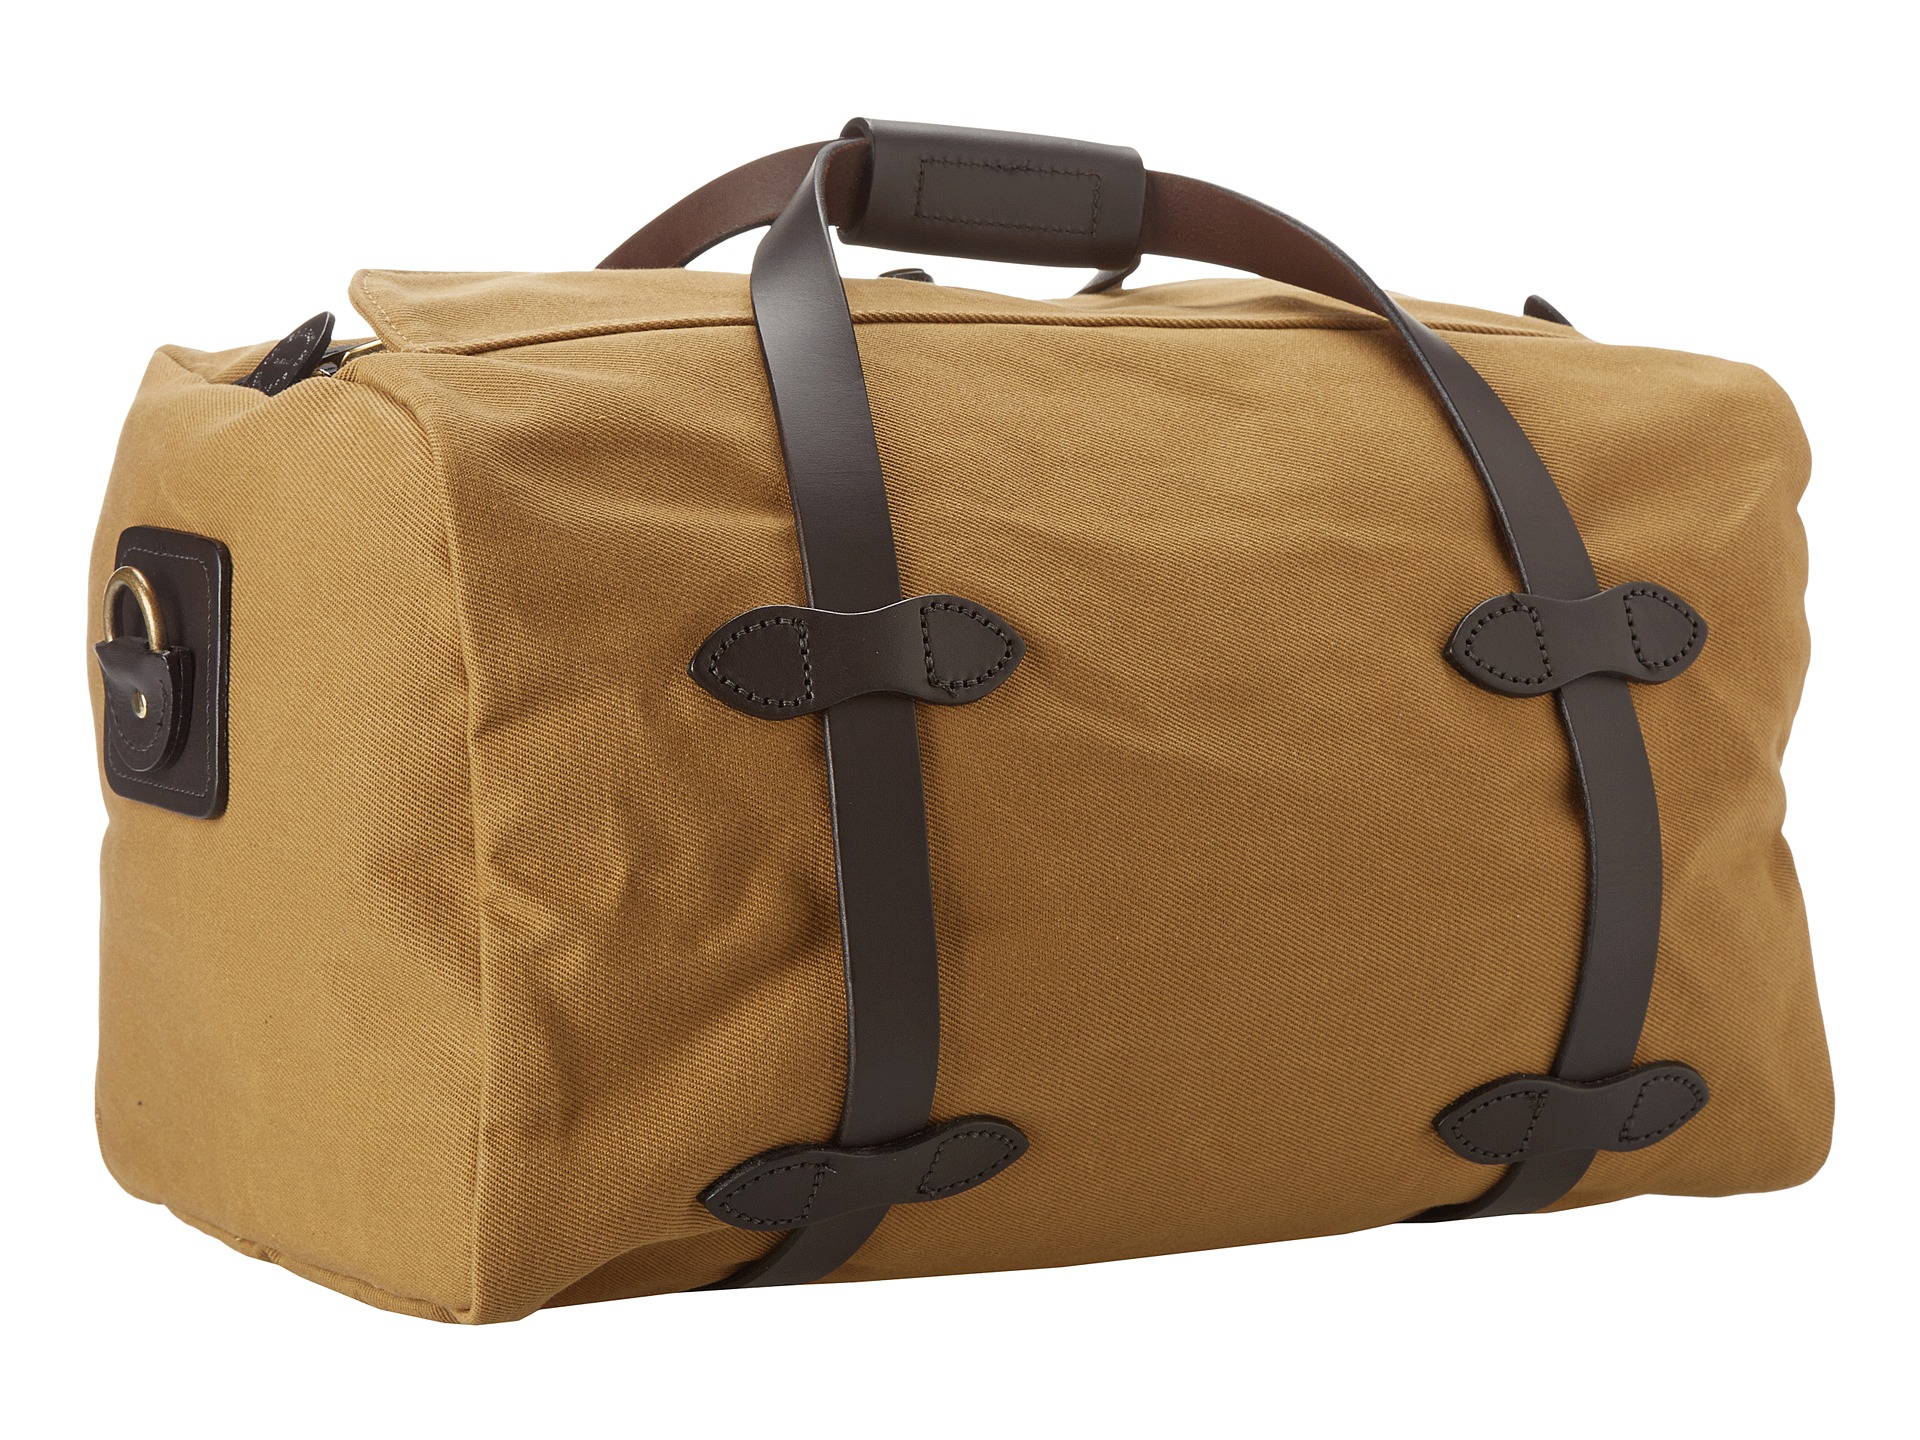 Filson Small Duffle Bag - www.bagssaleusa.com/product-category/classic-bags/ Free Shipping BOTH Ways